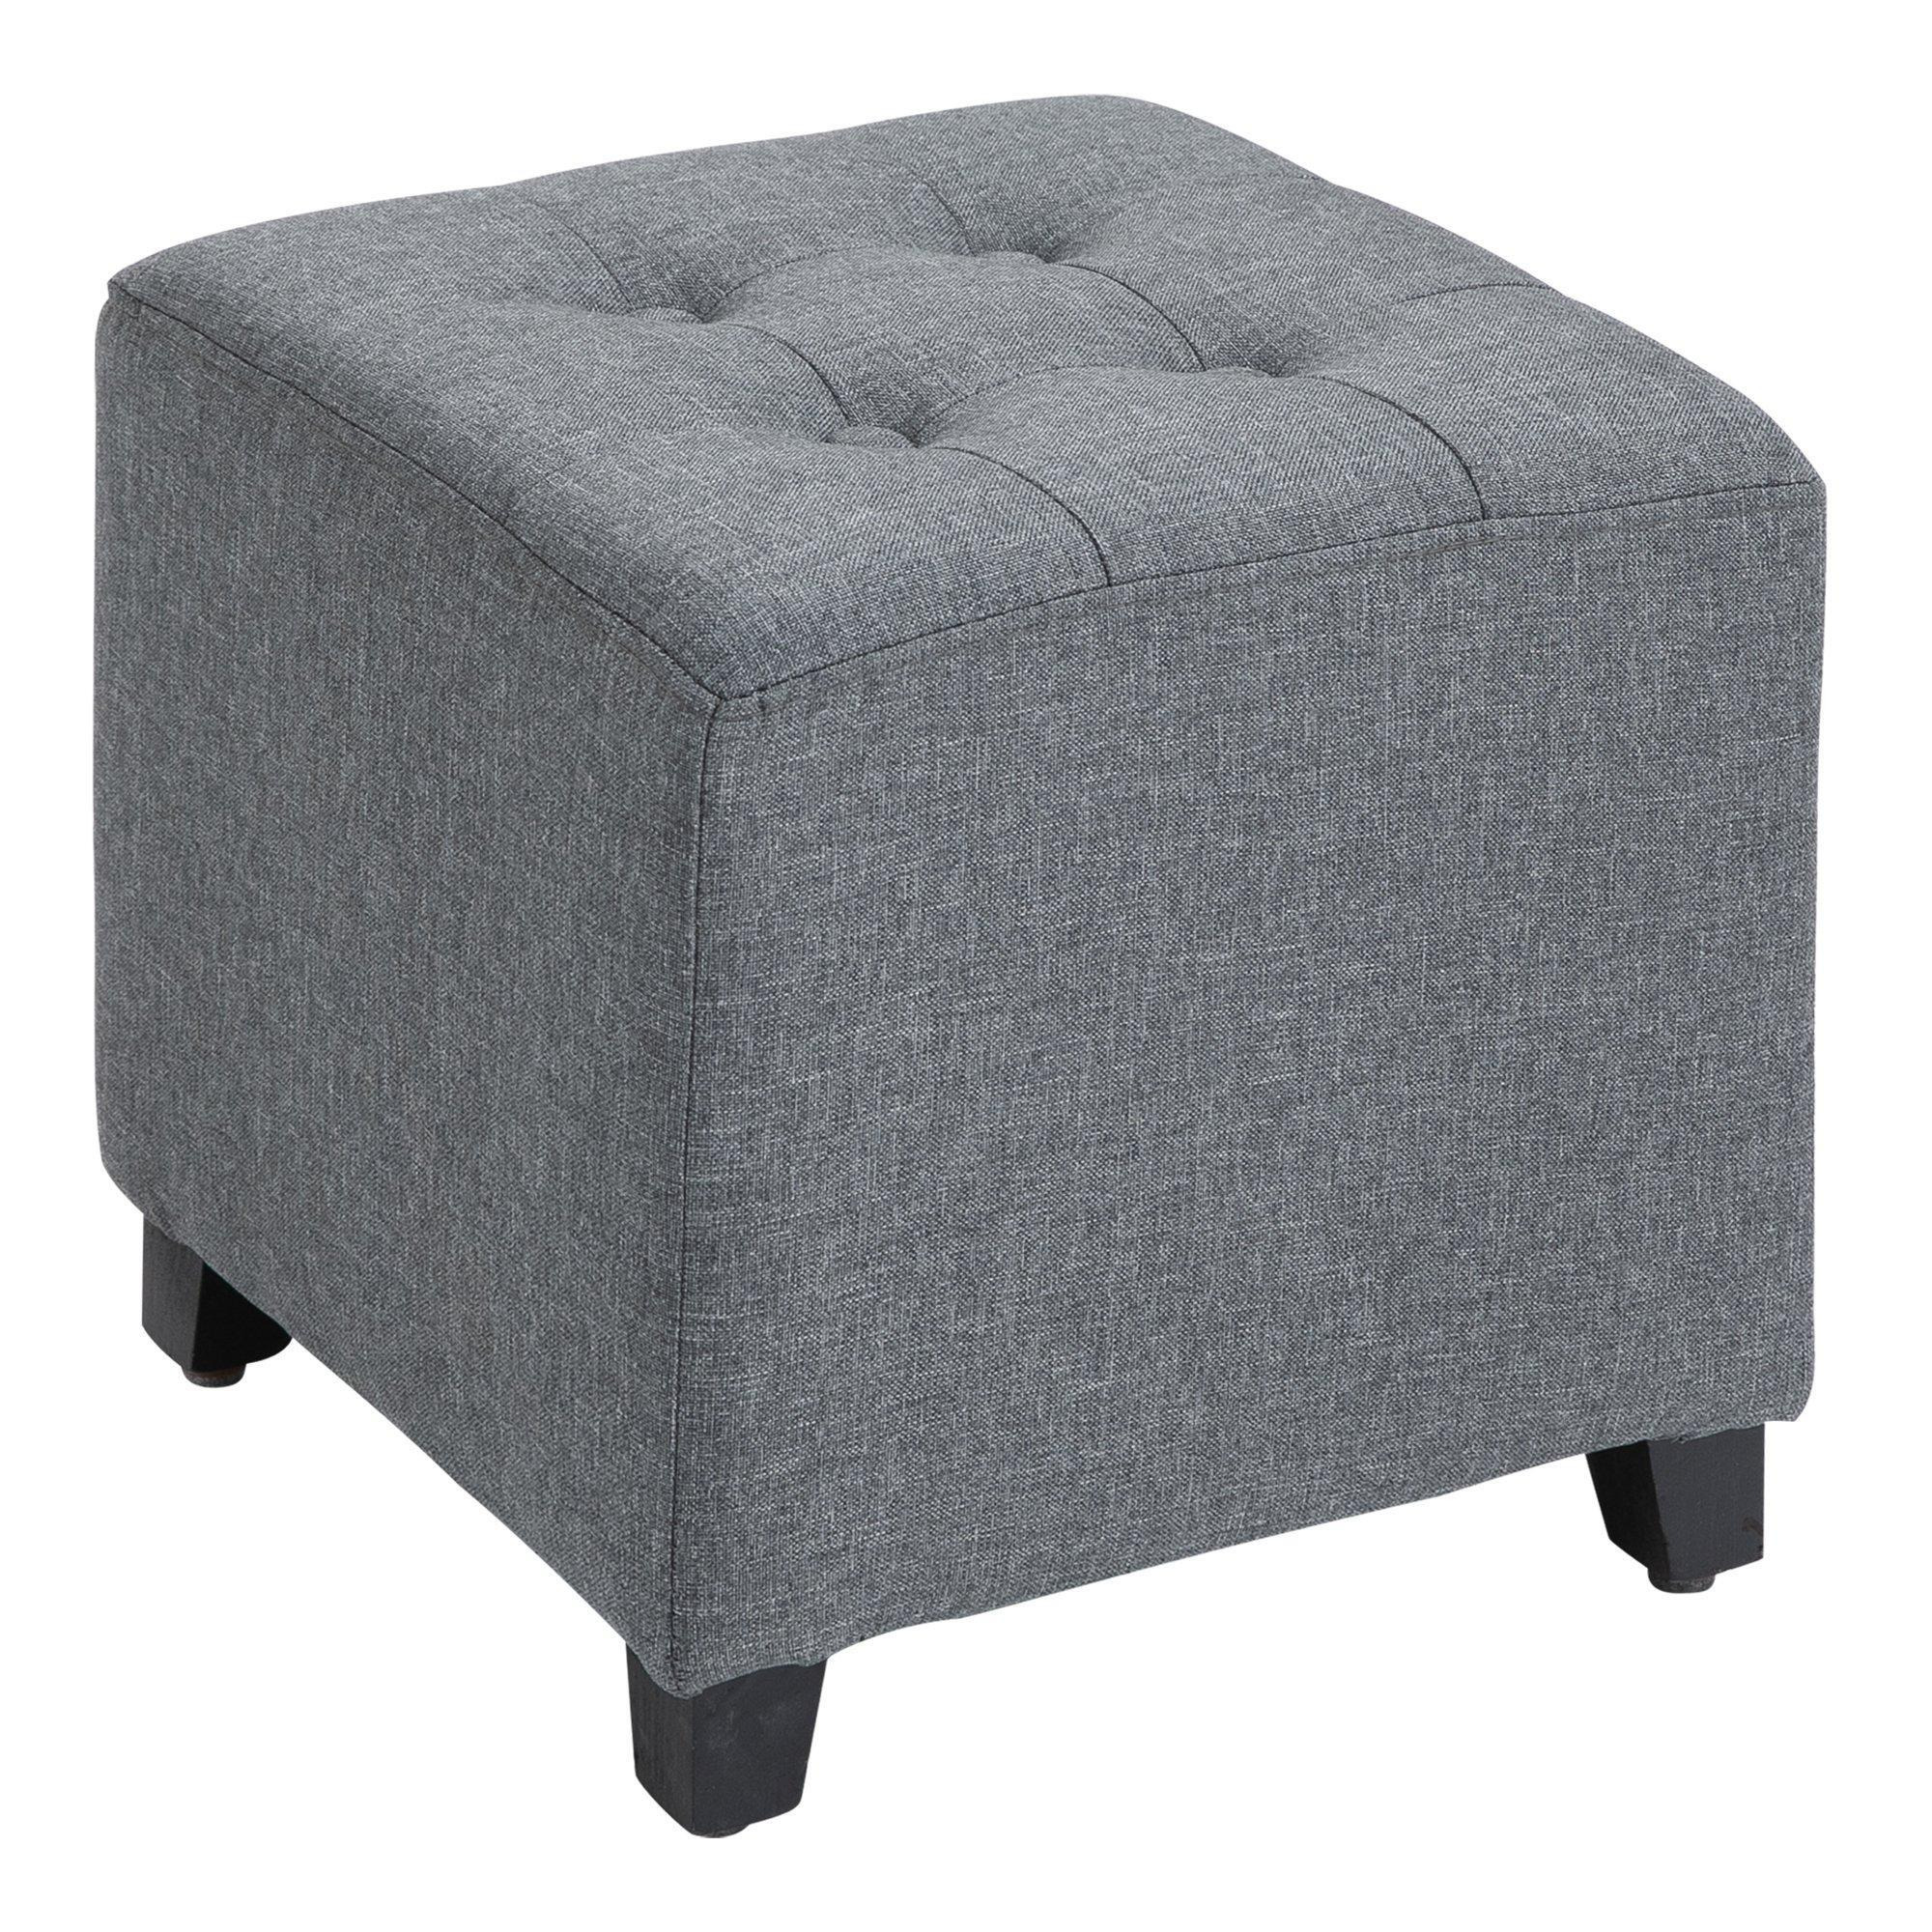 Linen-Look Square Ottoman Footstool with Button Tufts Wood Frame - image 1